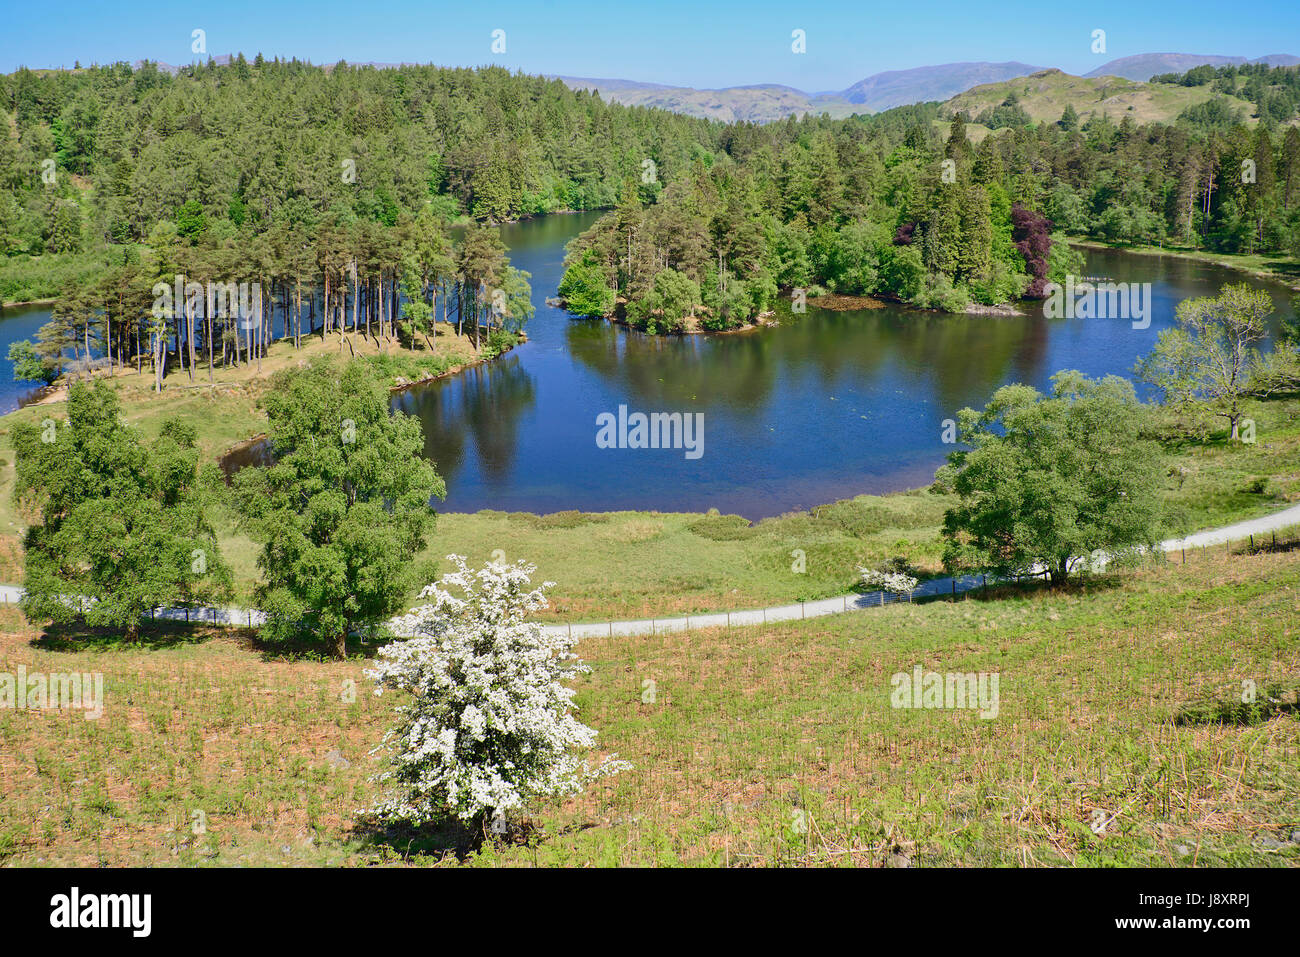 L'Angleterre, Cumbria, Lake District, Tarn Hows. Banque D'Images